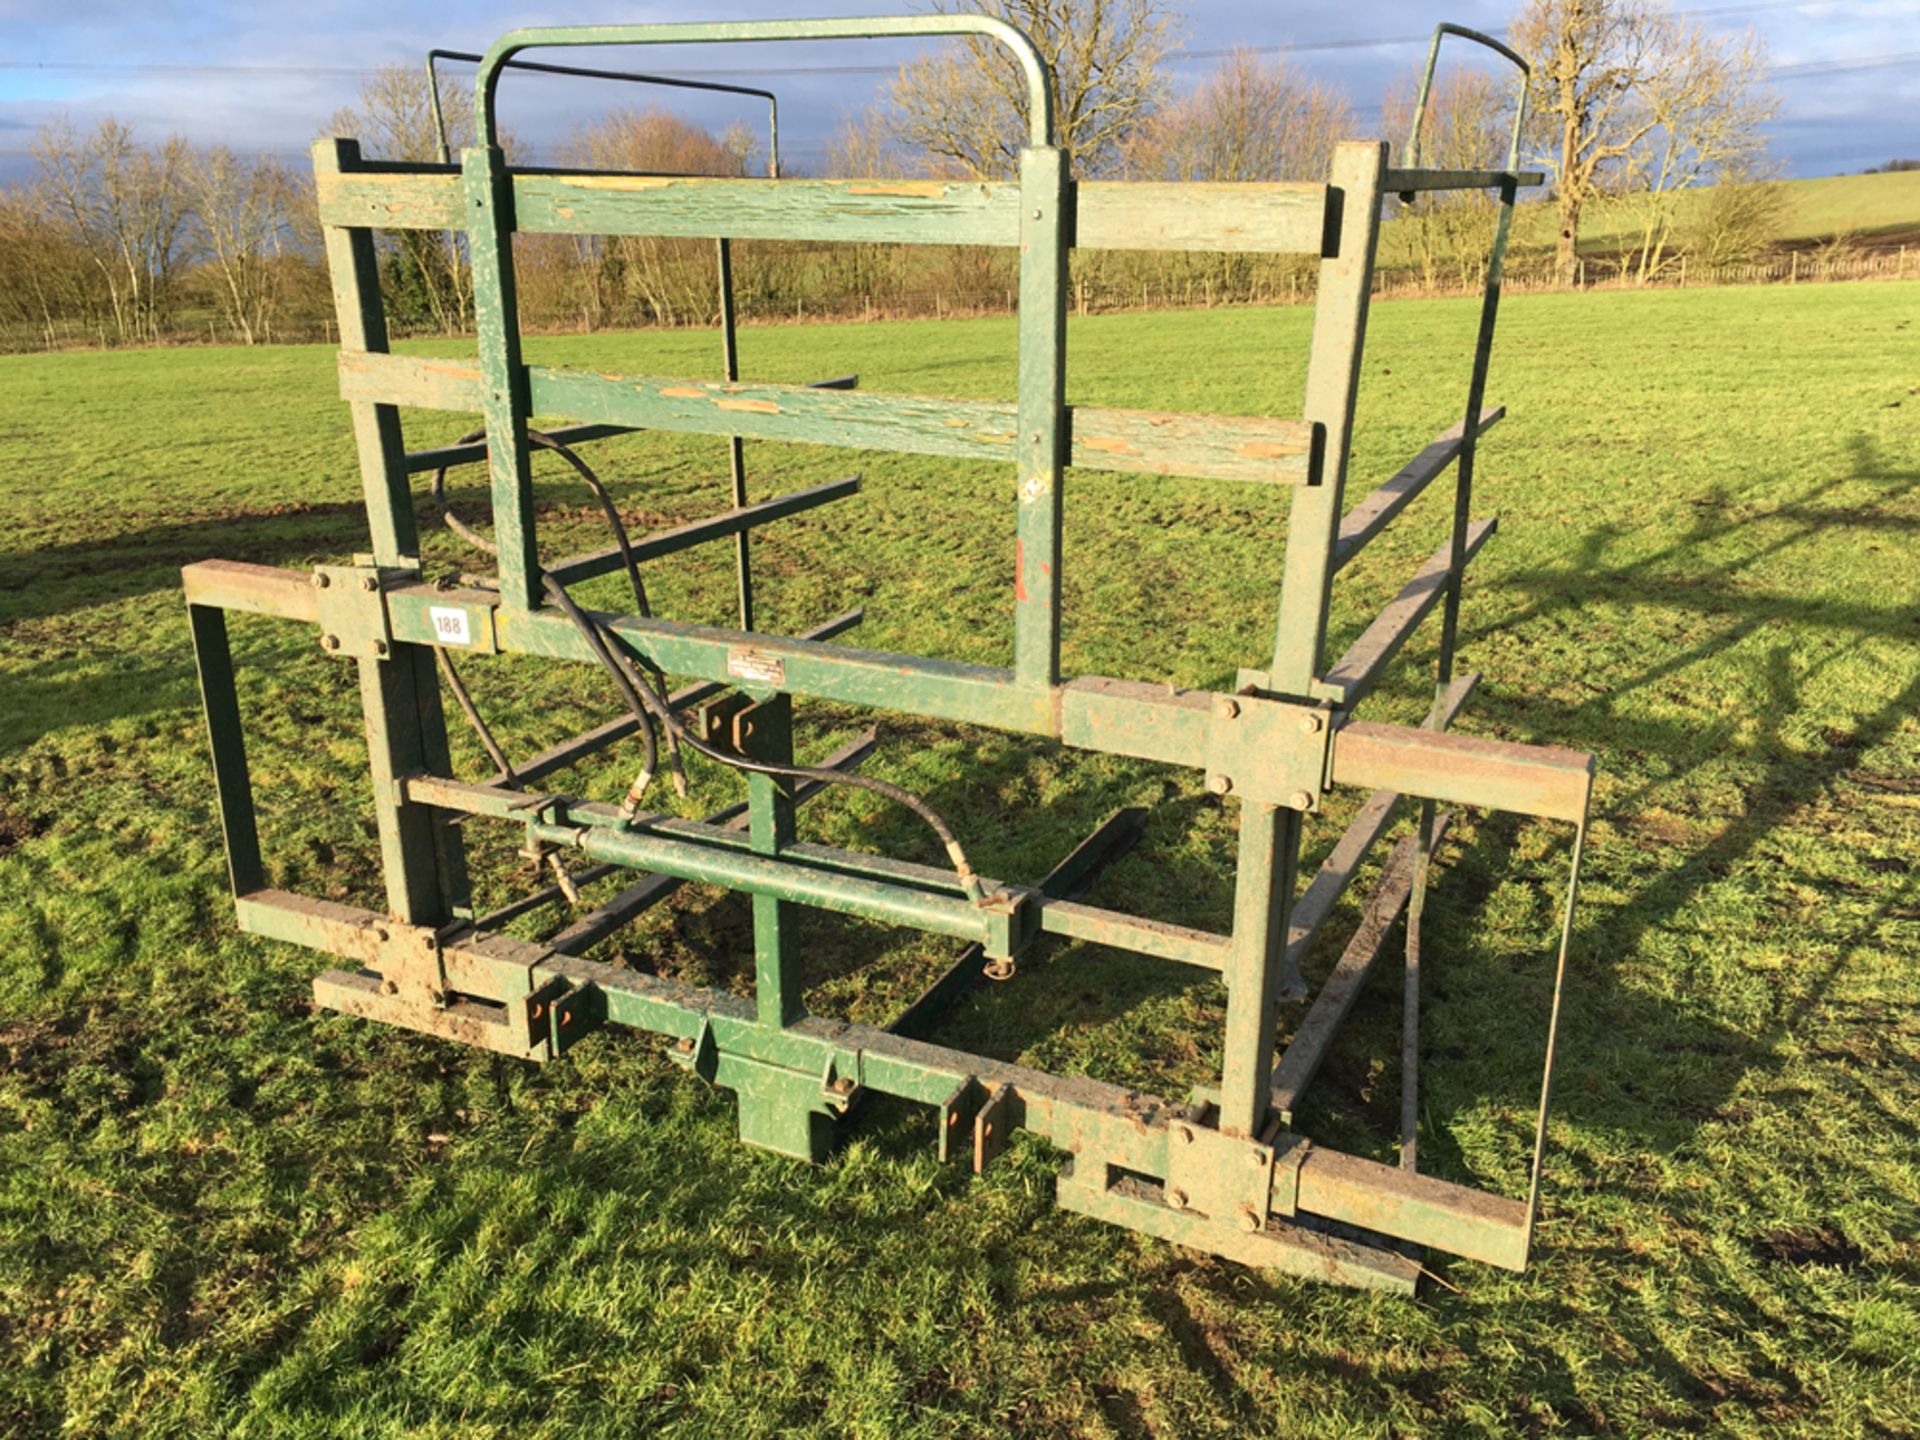 3 pt linkage Browns 40 bale carrier